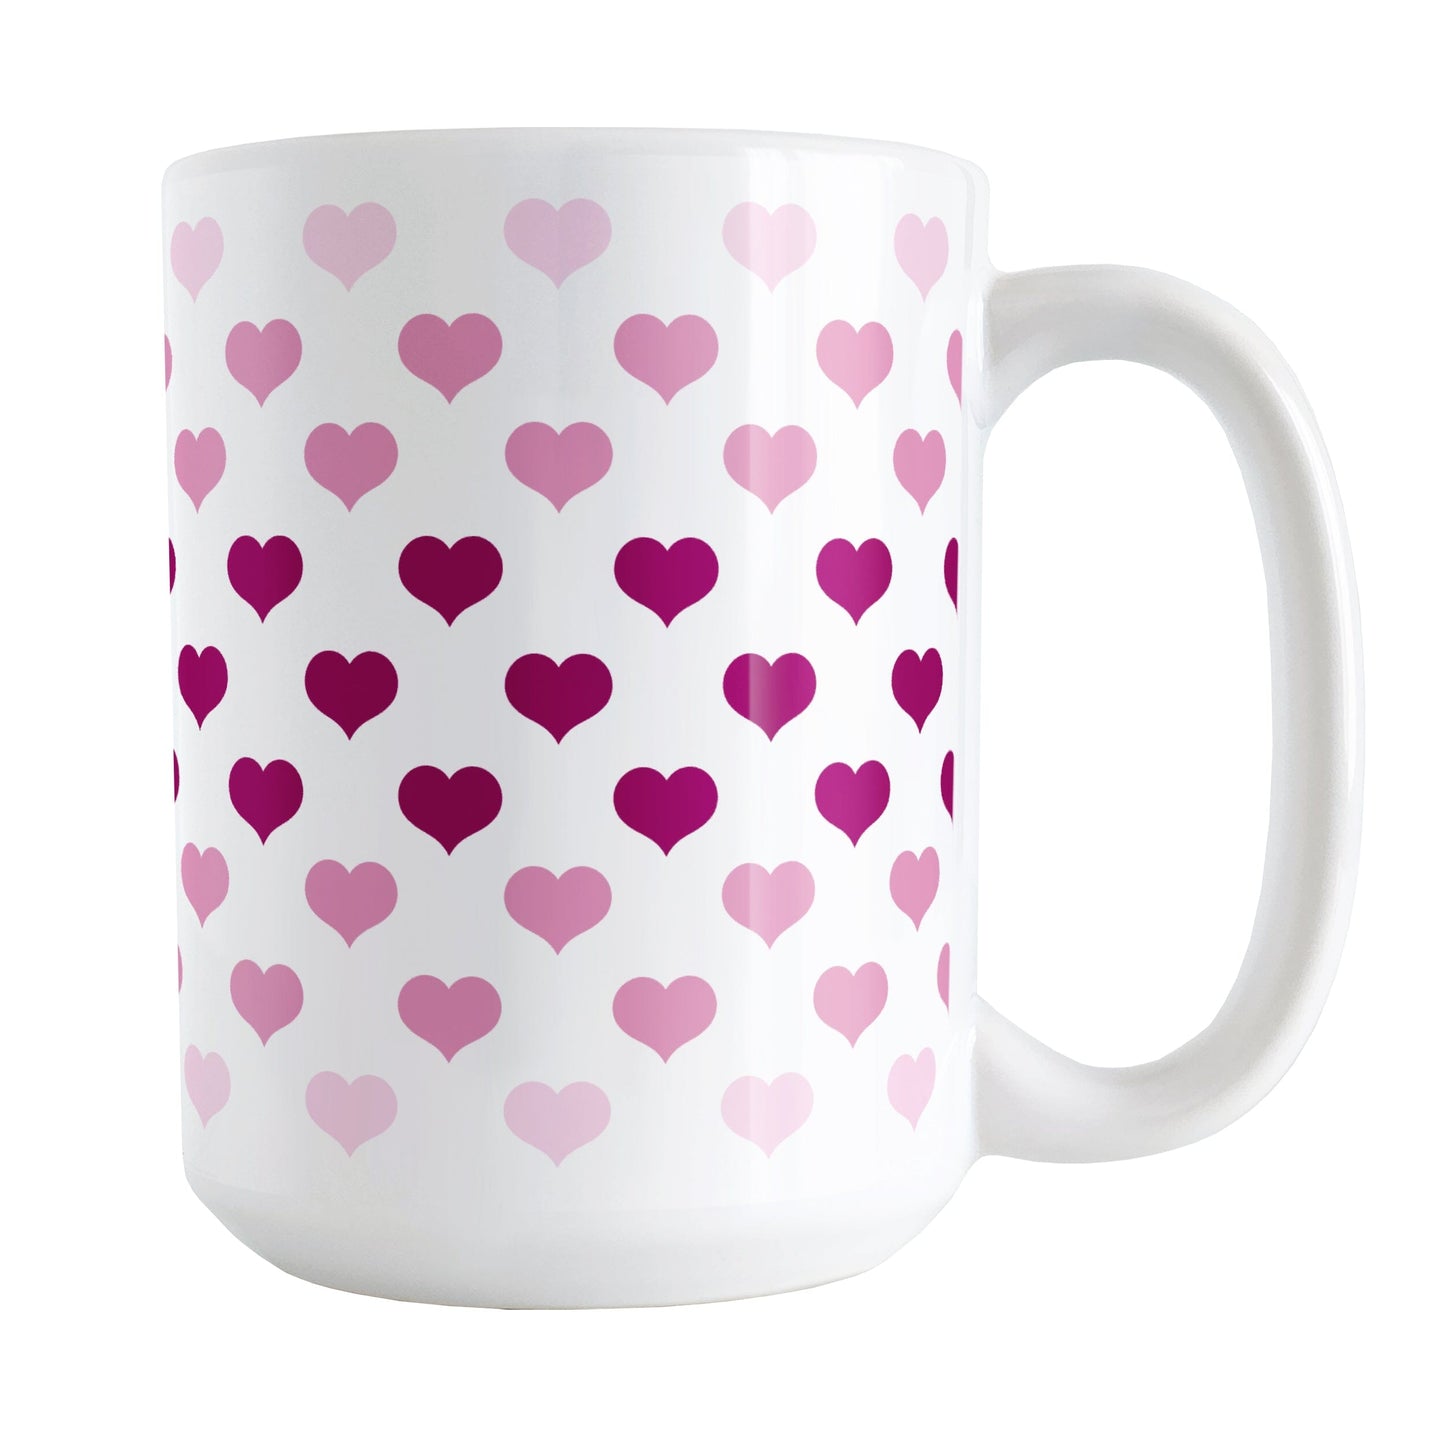 Hearts in Pink Mug (15oz) at Amy's Coffee Mugs. A ceramic coffee mug designed with hearts in different shades of pink, with the darker pink color across the middle and the lighter pink along the top and bottom, in a pattern that wraps around the mug to the handle. 